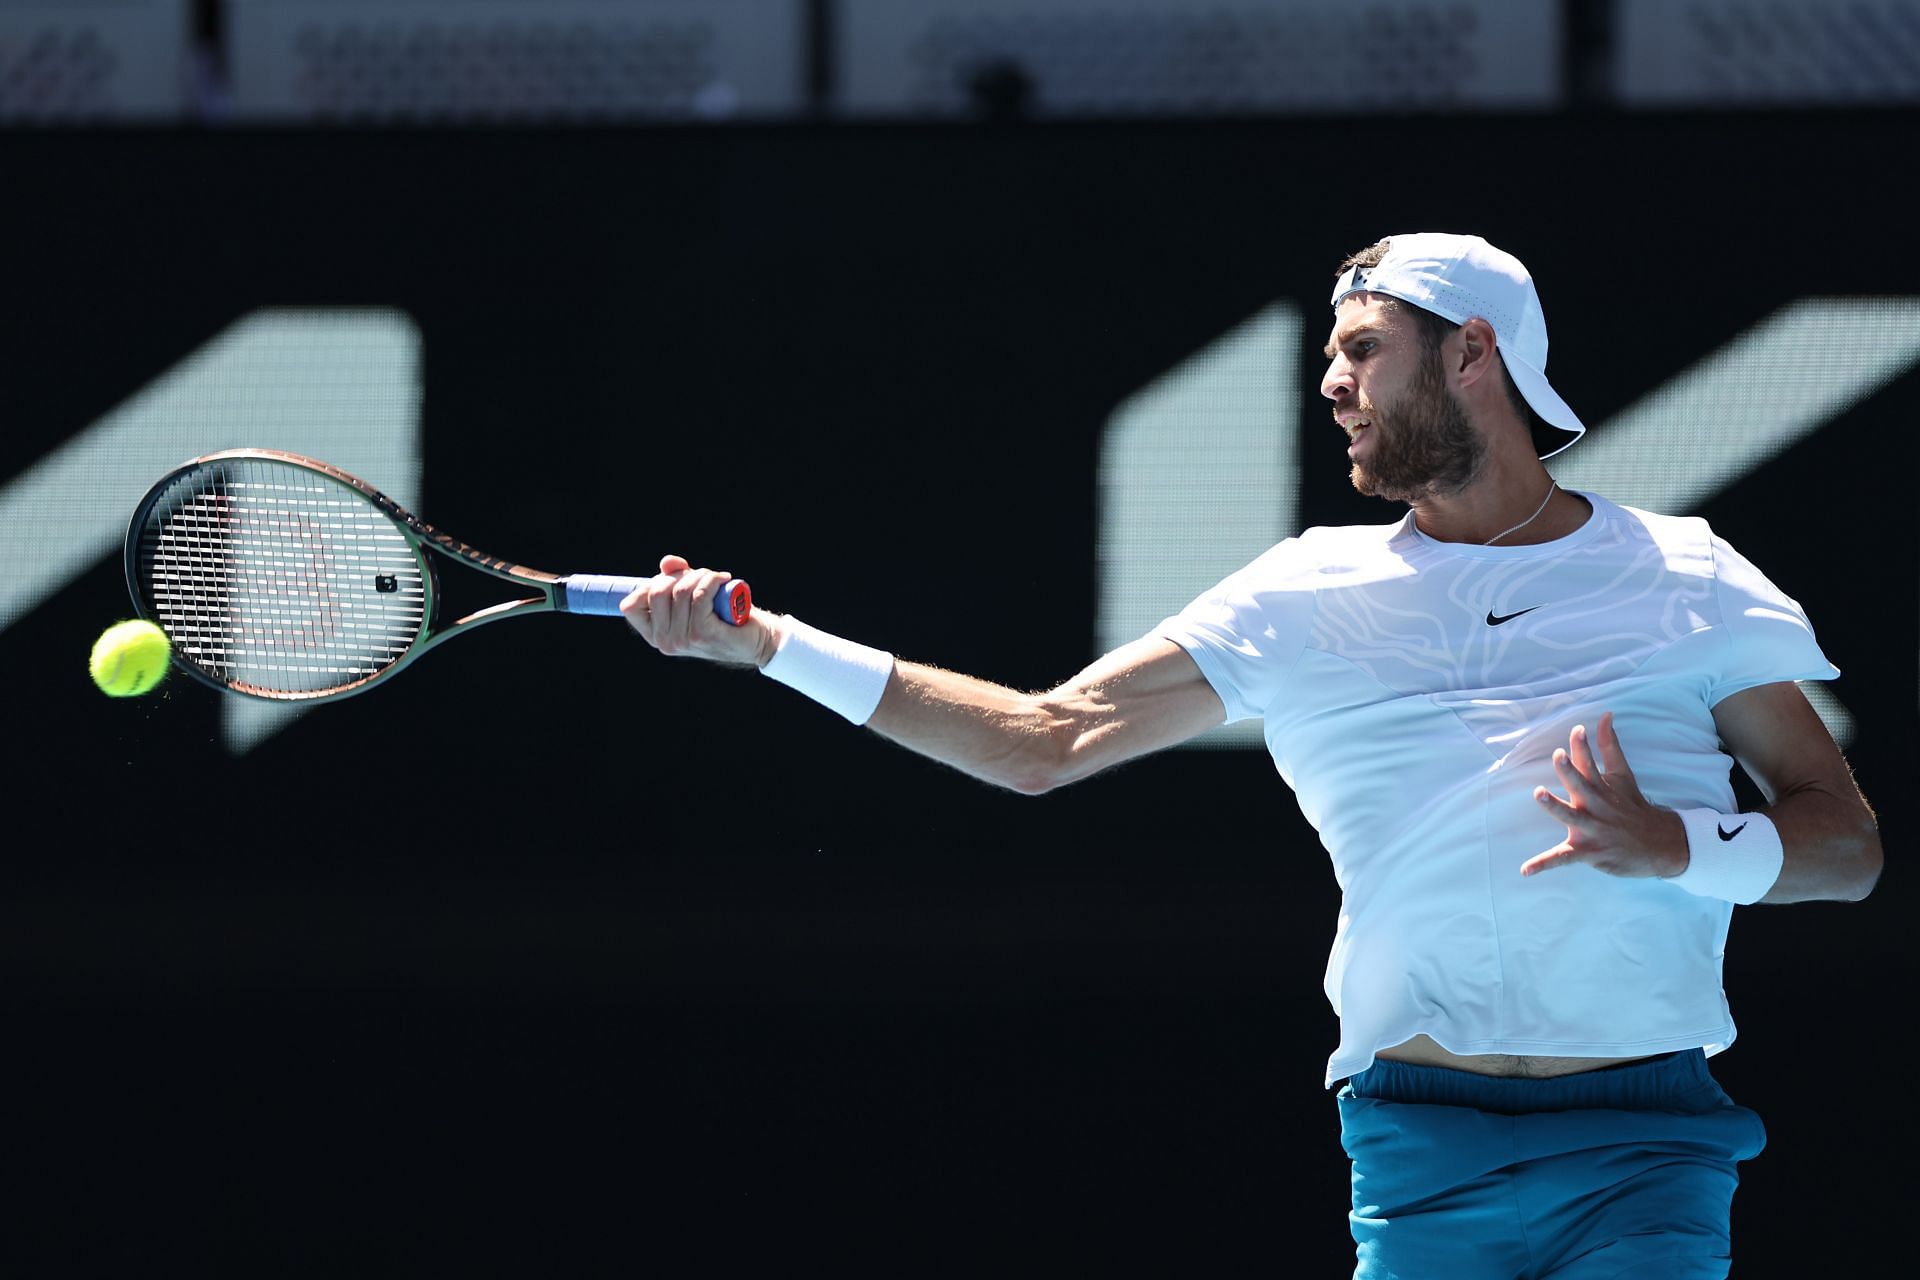 Khachanov will look to be the aggressor in the contest.